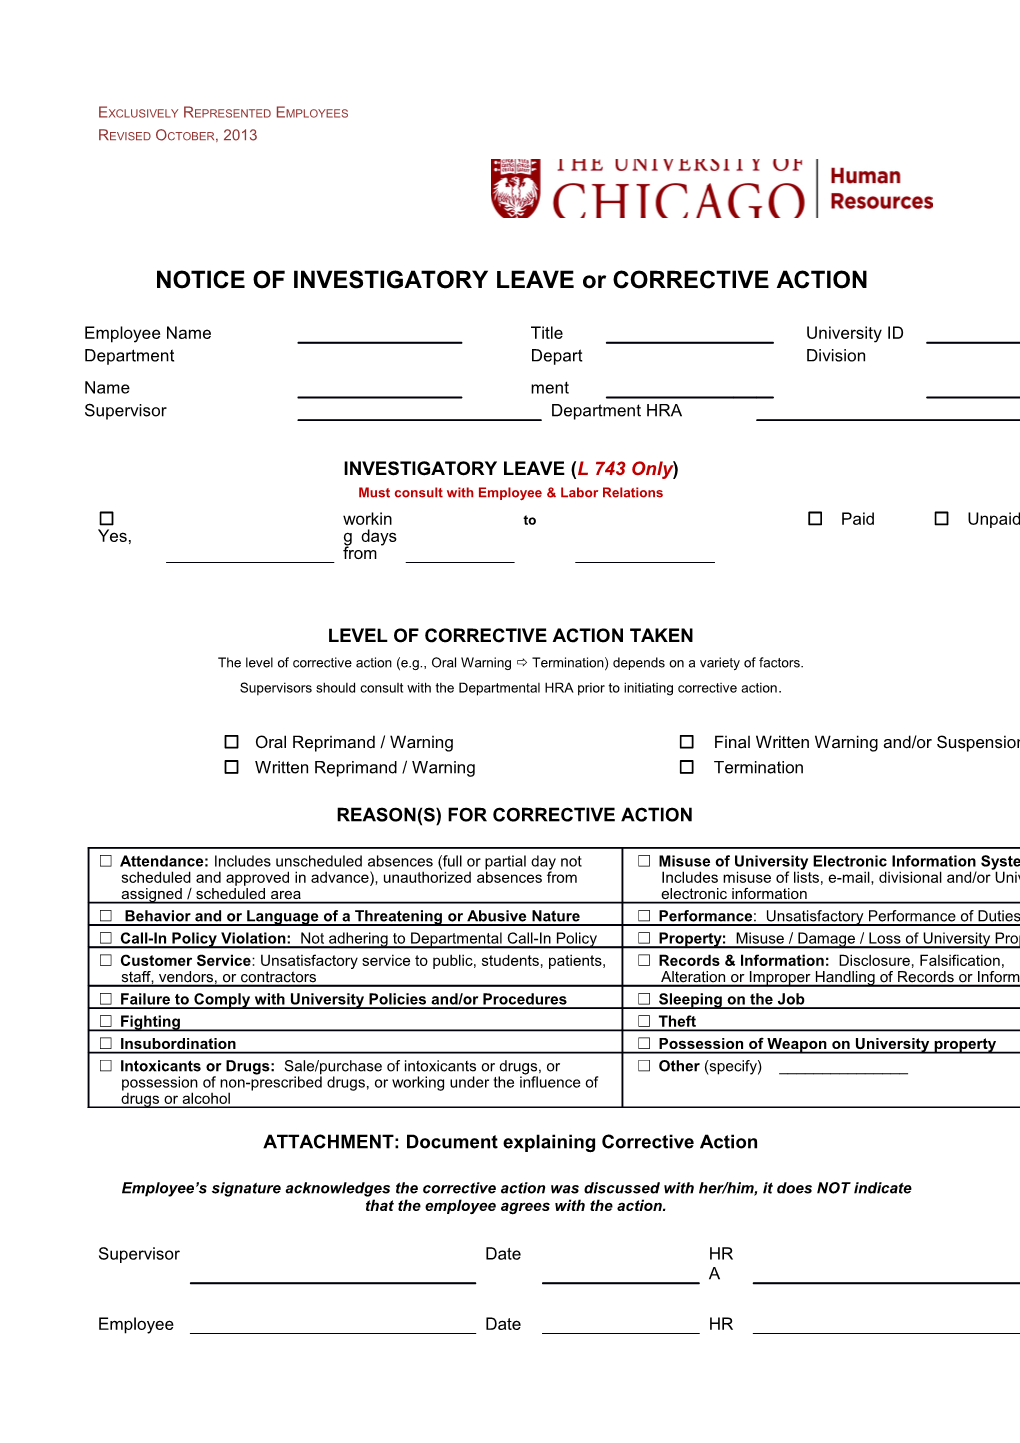 NOTICE of INVESTIGATORY LEAVE Or CORRECTIVE ACTION